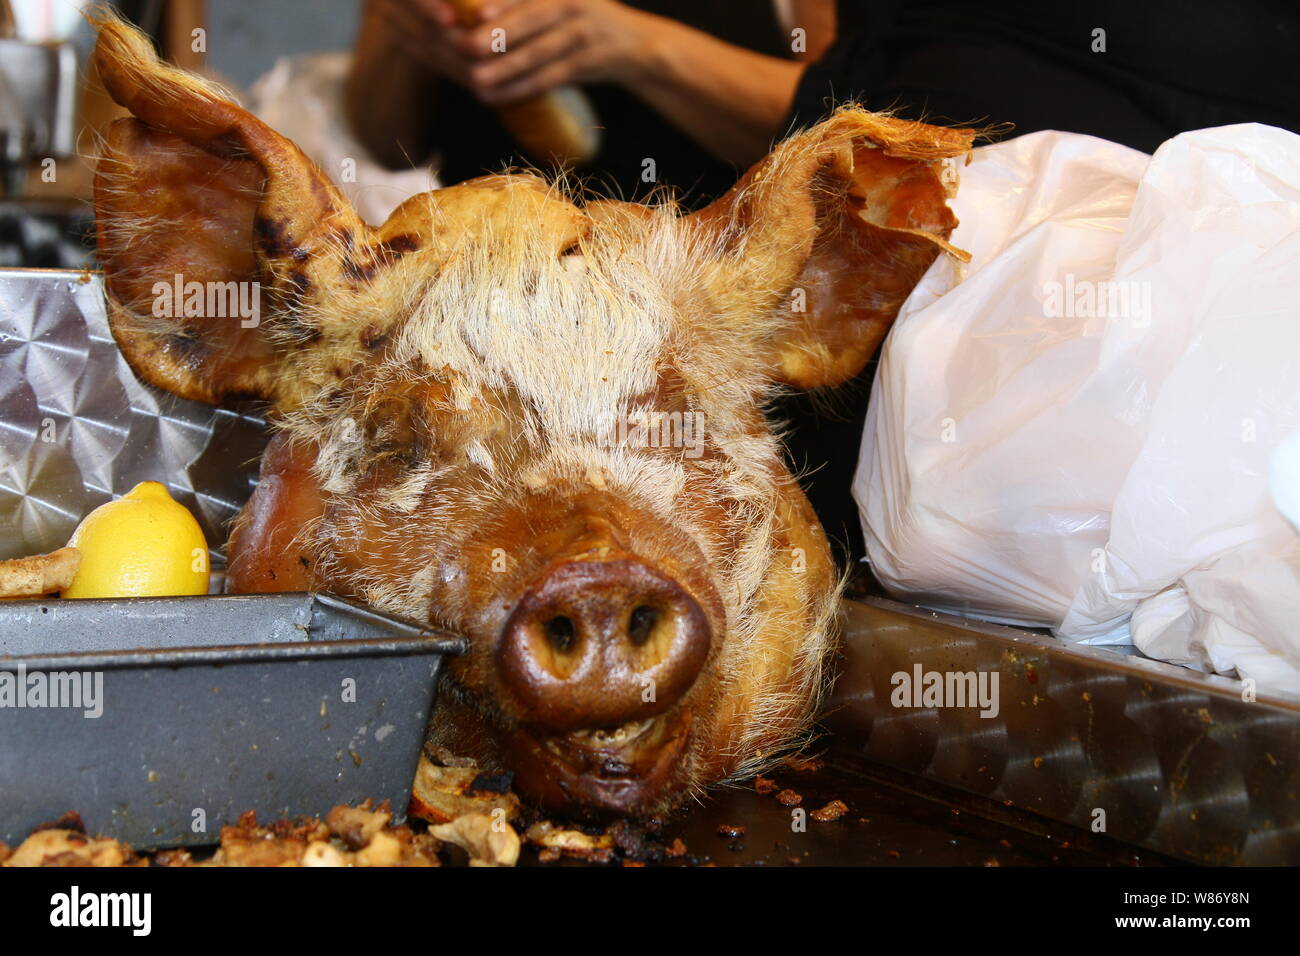 RED MEAT. PORK. ROASTED PIG HEAD FOR HUMAN CONSUPTION. HUMANS EATING TO MUCH MEAT. SCIENTISTS FROM THE UNITED NATIONS CLIMATE PANEL SPECIAL REORT SUGGESTS PLANT BASED DIET  AS A MAJOR OPPORTUNITY FOR MITIGATING AND ADAPTING TO CLIMATE CHANGE. FOOD. DIET. Stock Photo